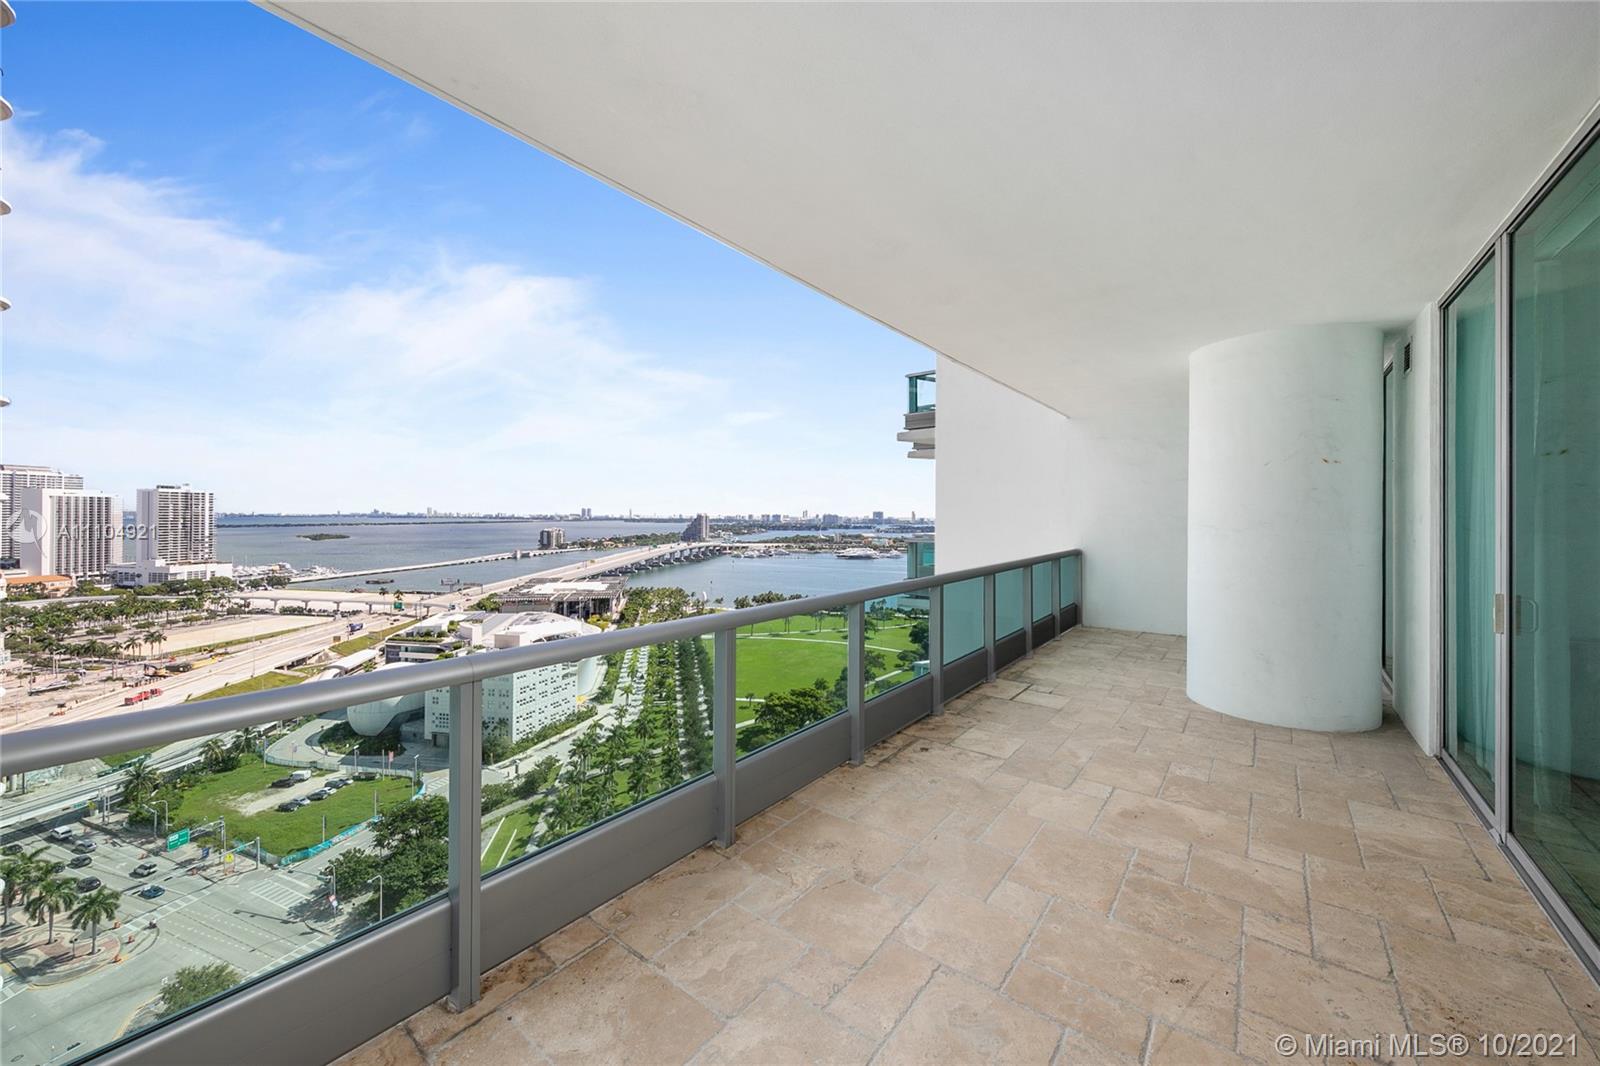 Photo 1 of 900 Biscayne Bay Apt 2708 in Miami - MLS A11104921